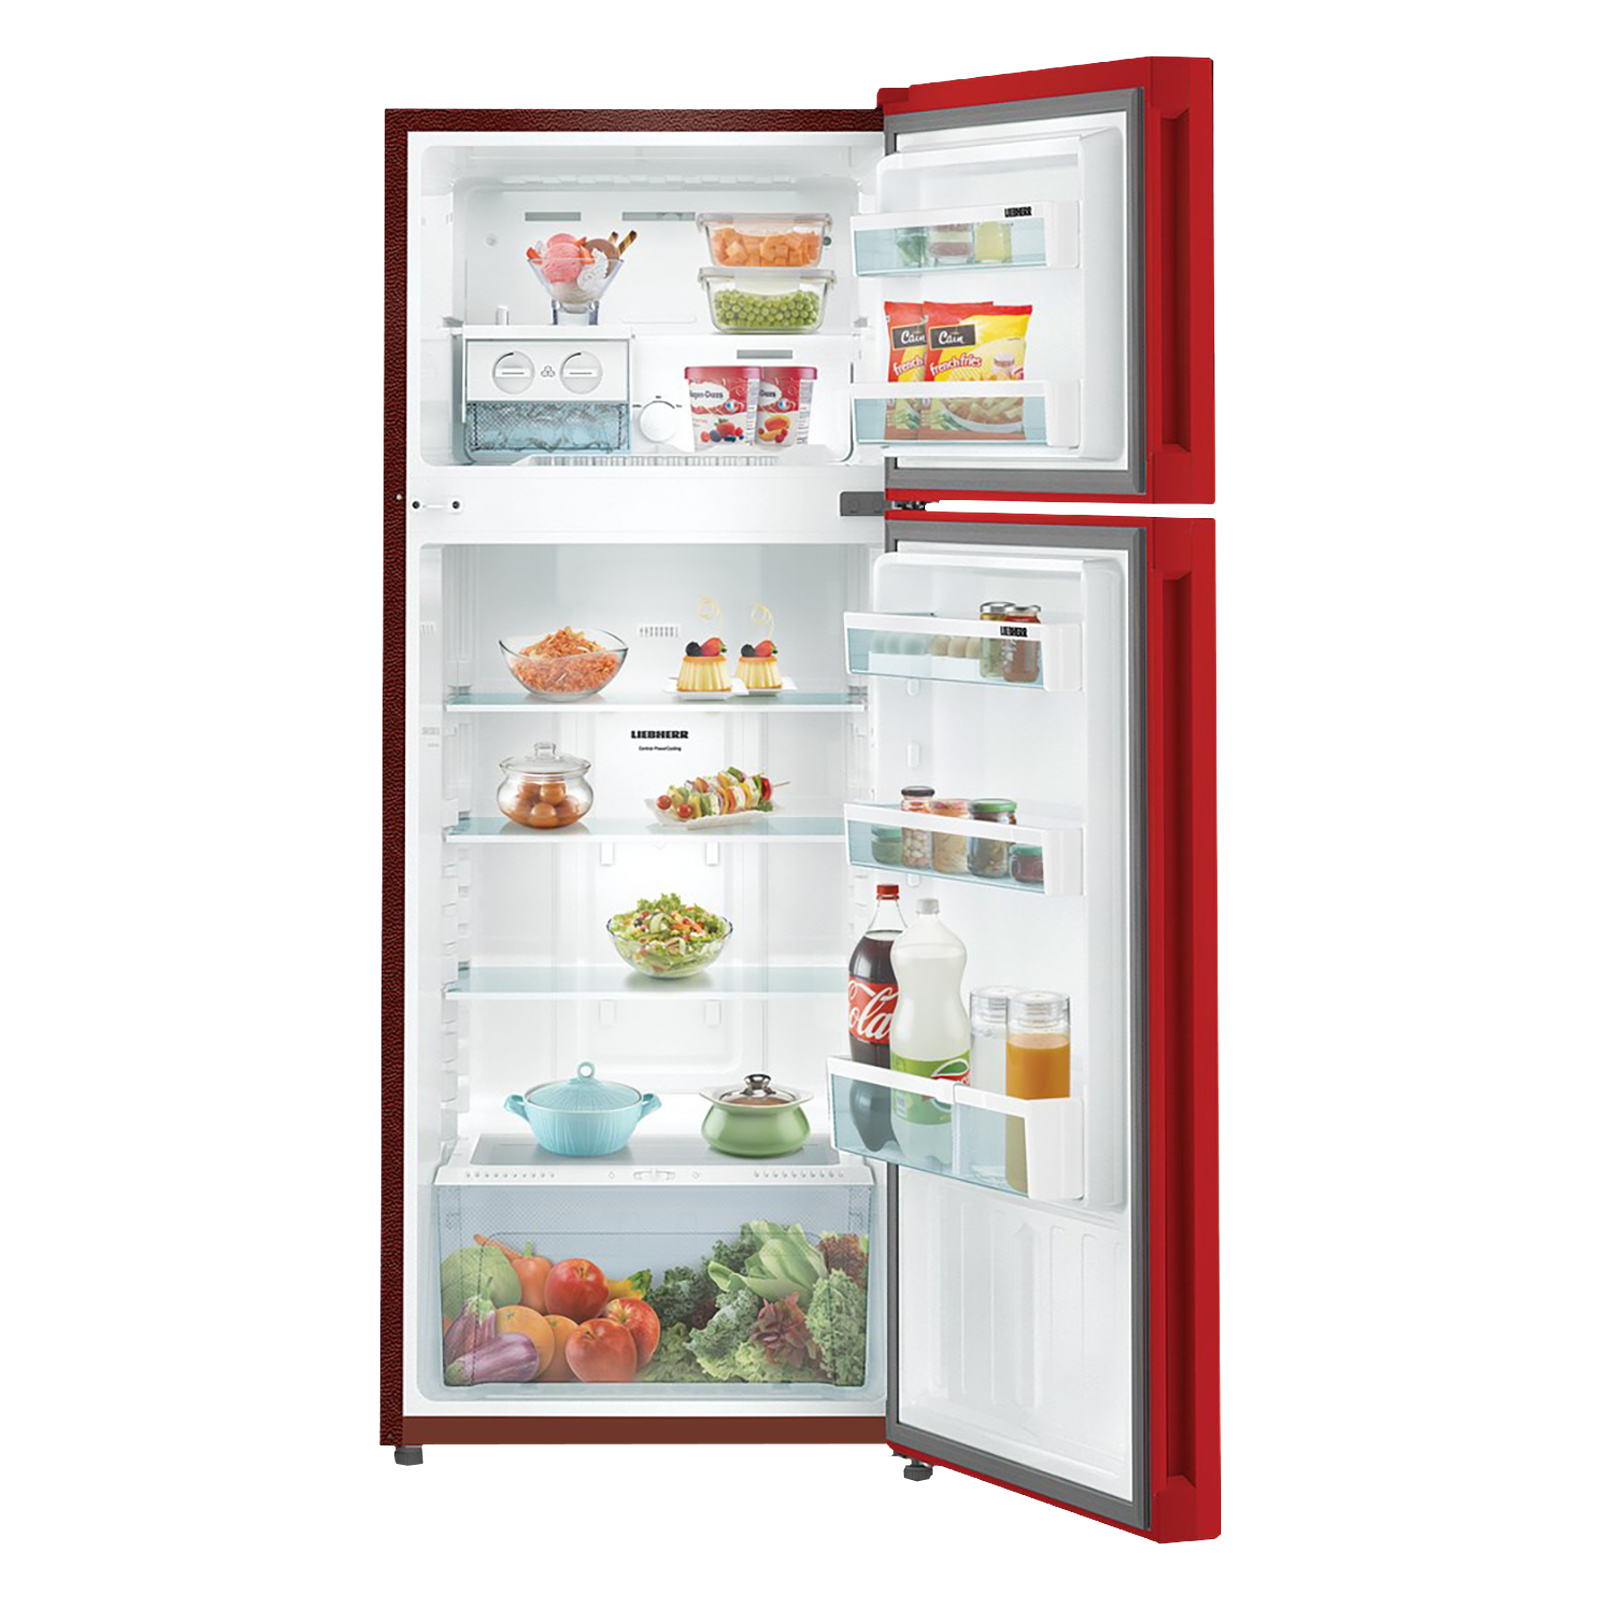 Liebherr 265 Litres 2 Star Frost Free Double Door Refrigerator with Multi Air Flow System (TCRF 2610, Red Floral)_4